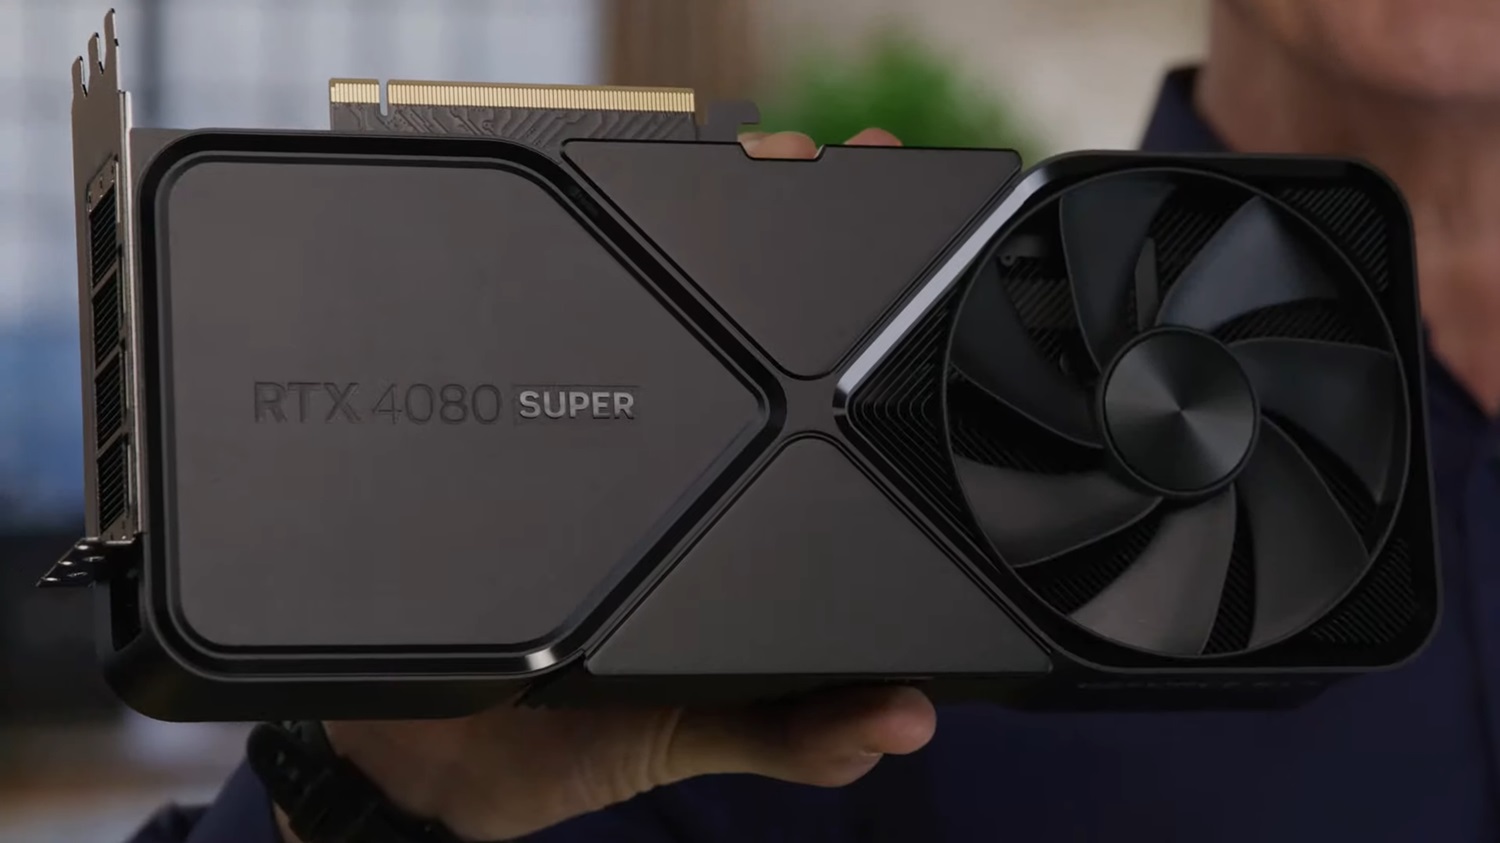 Nvidia did the unthinkable with the RTX 4080 Super